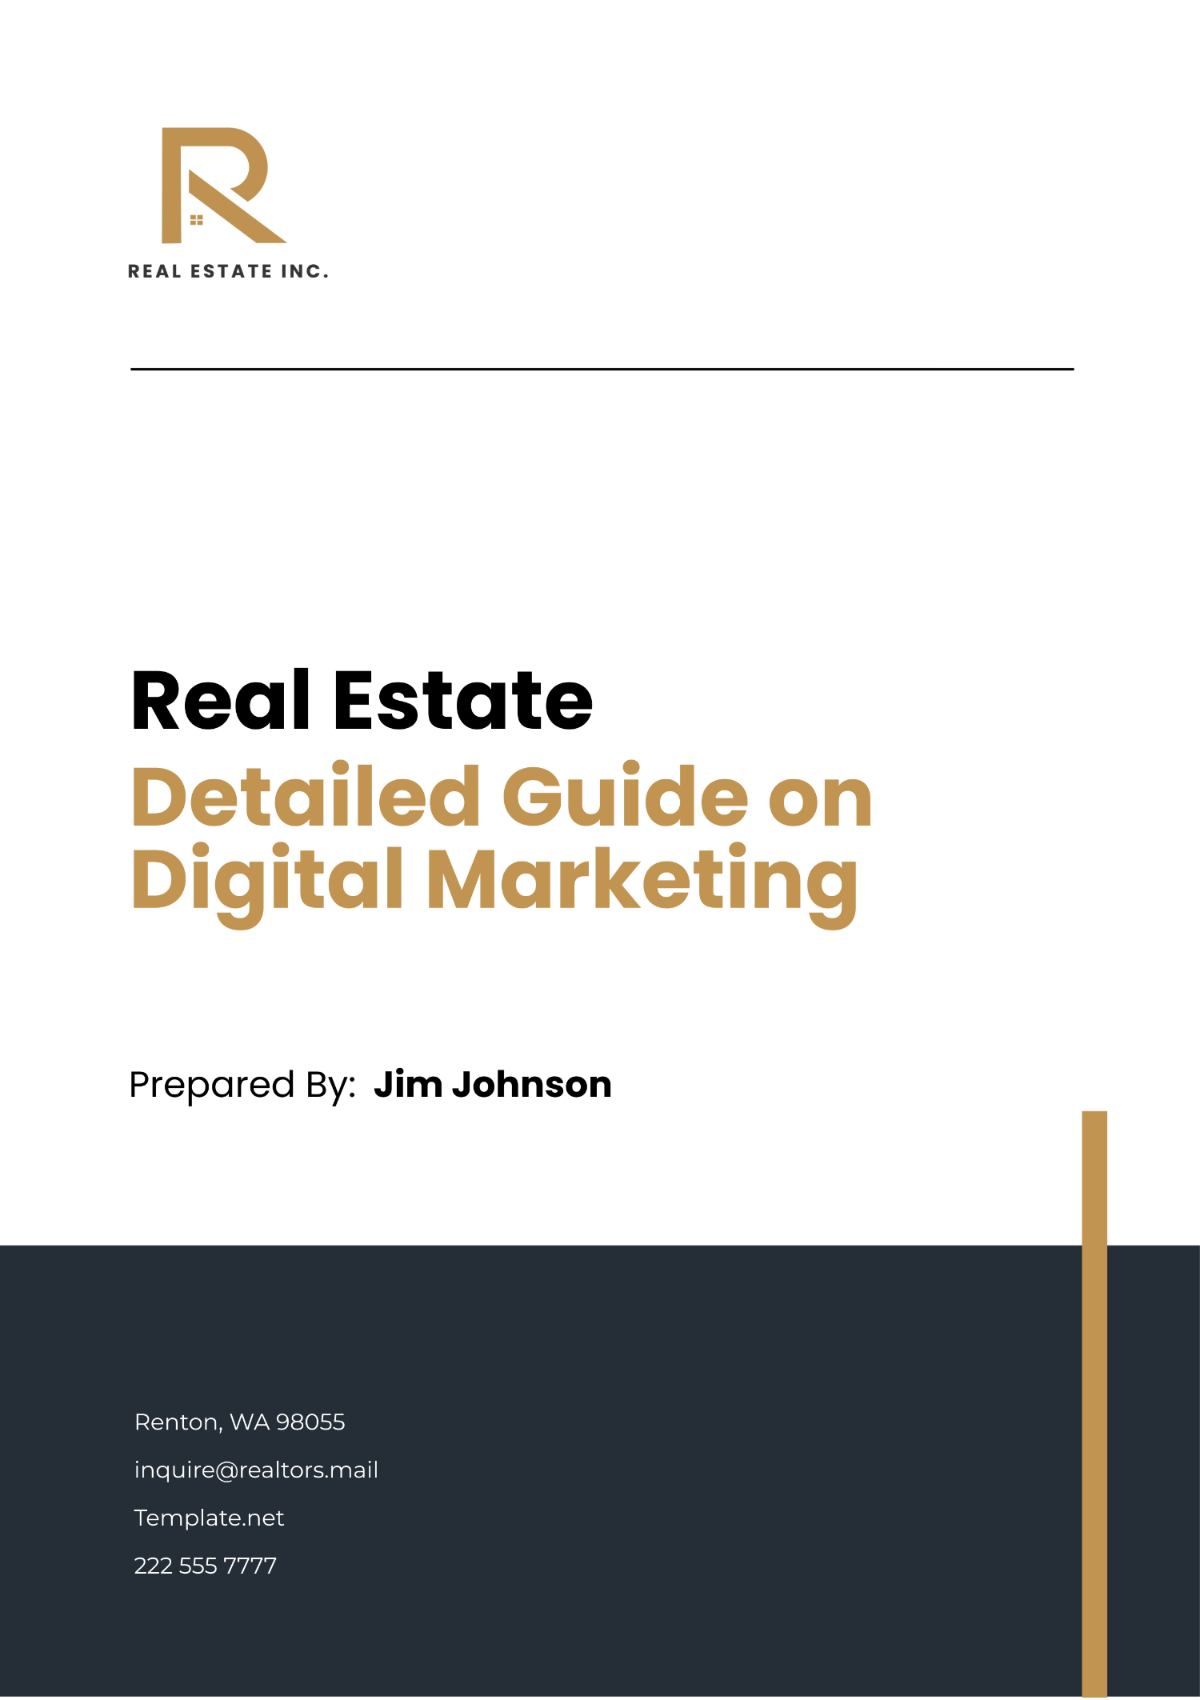 Free Real Estate Detailed Guide on Digital Marketing Template